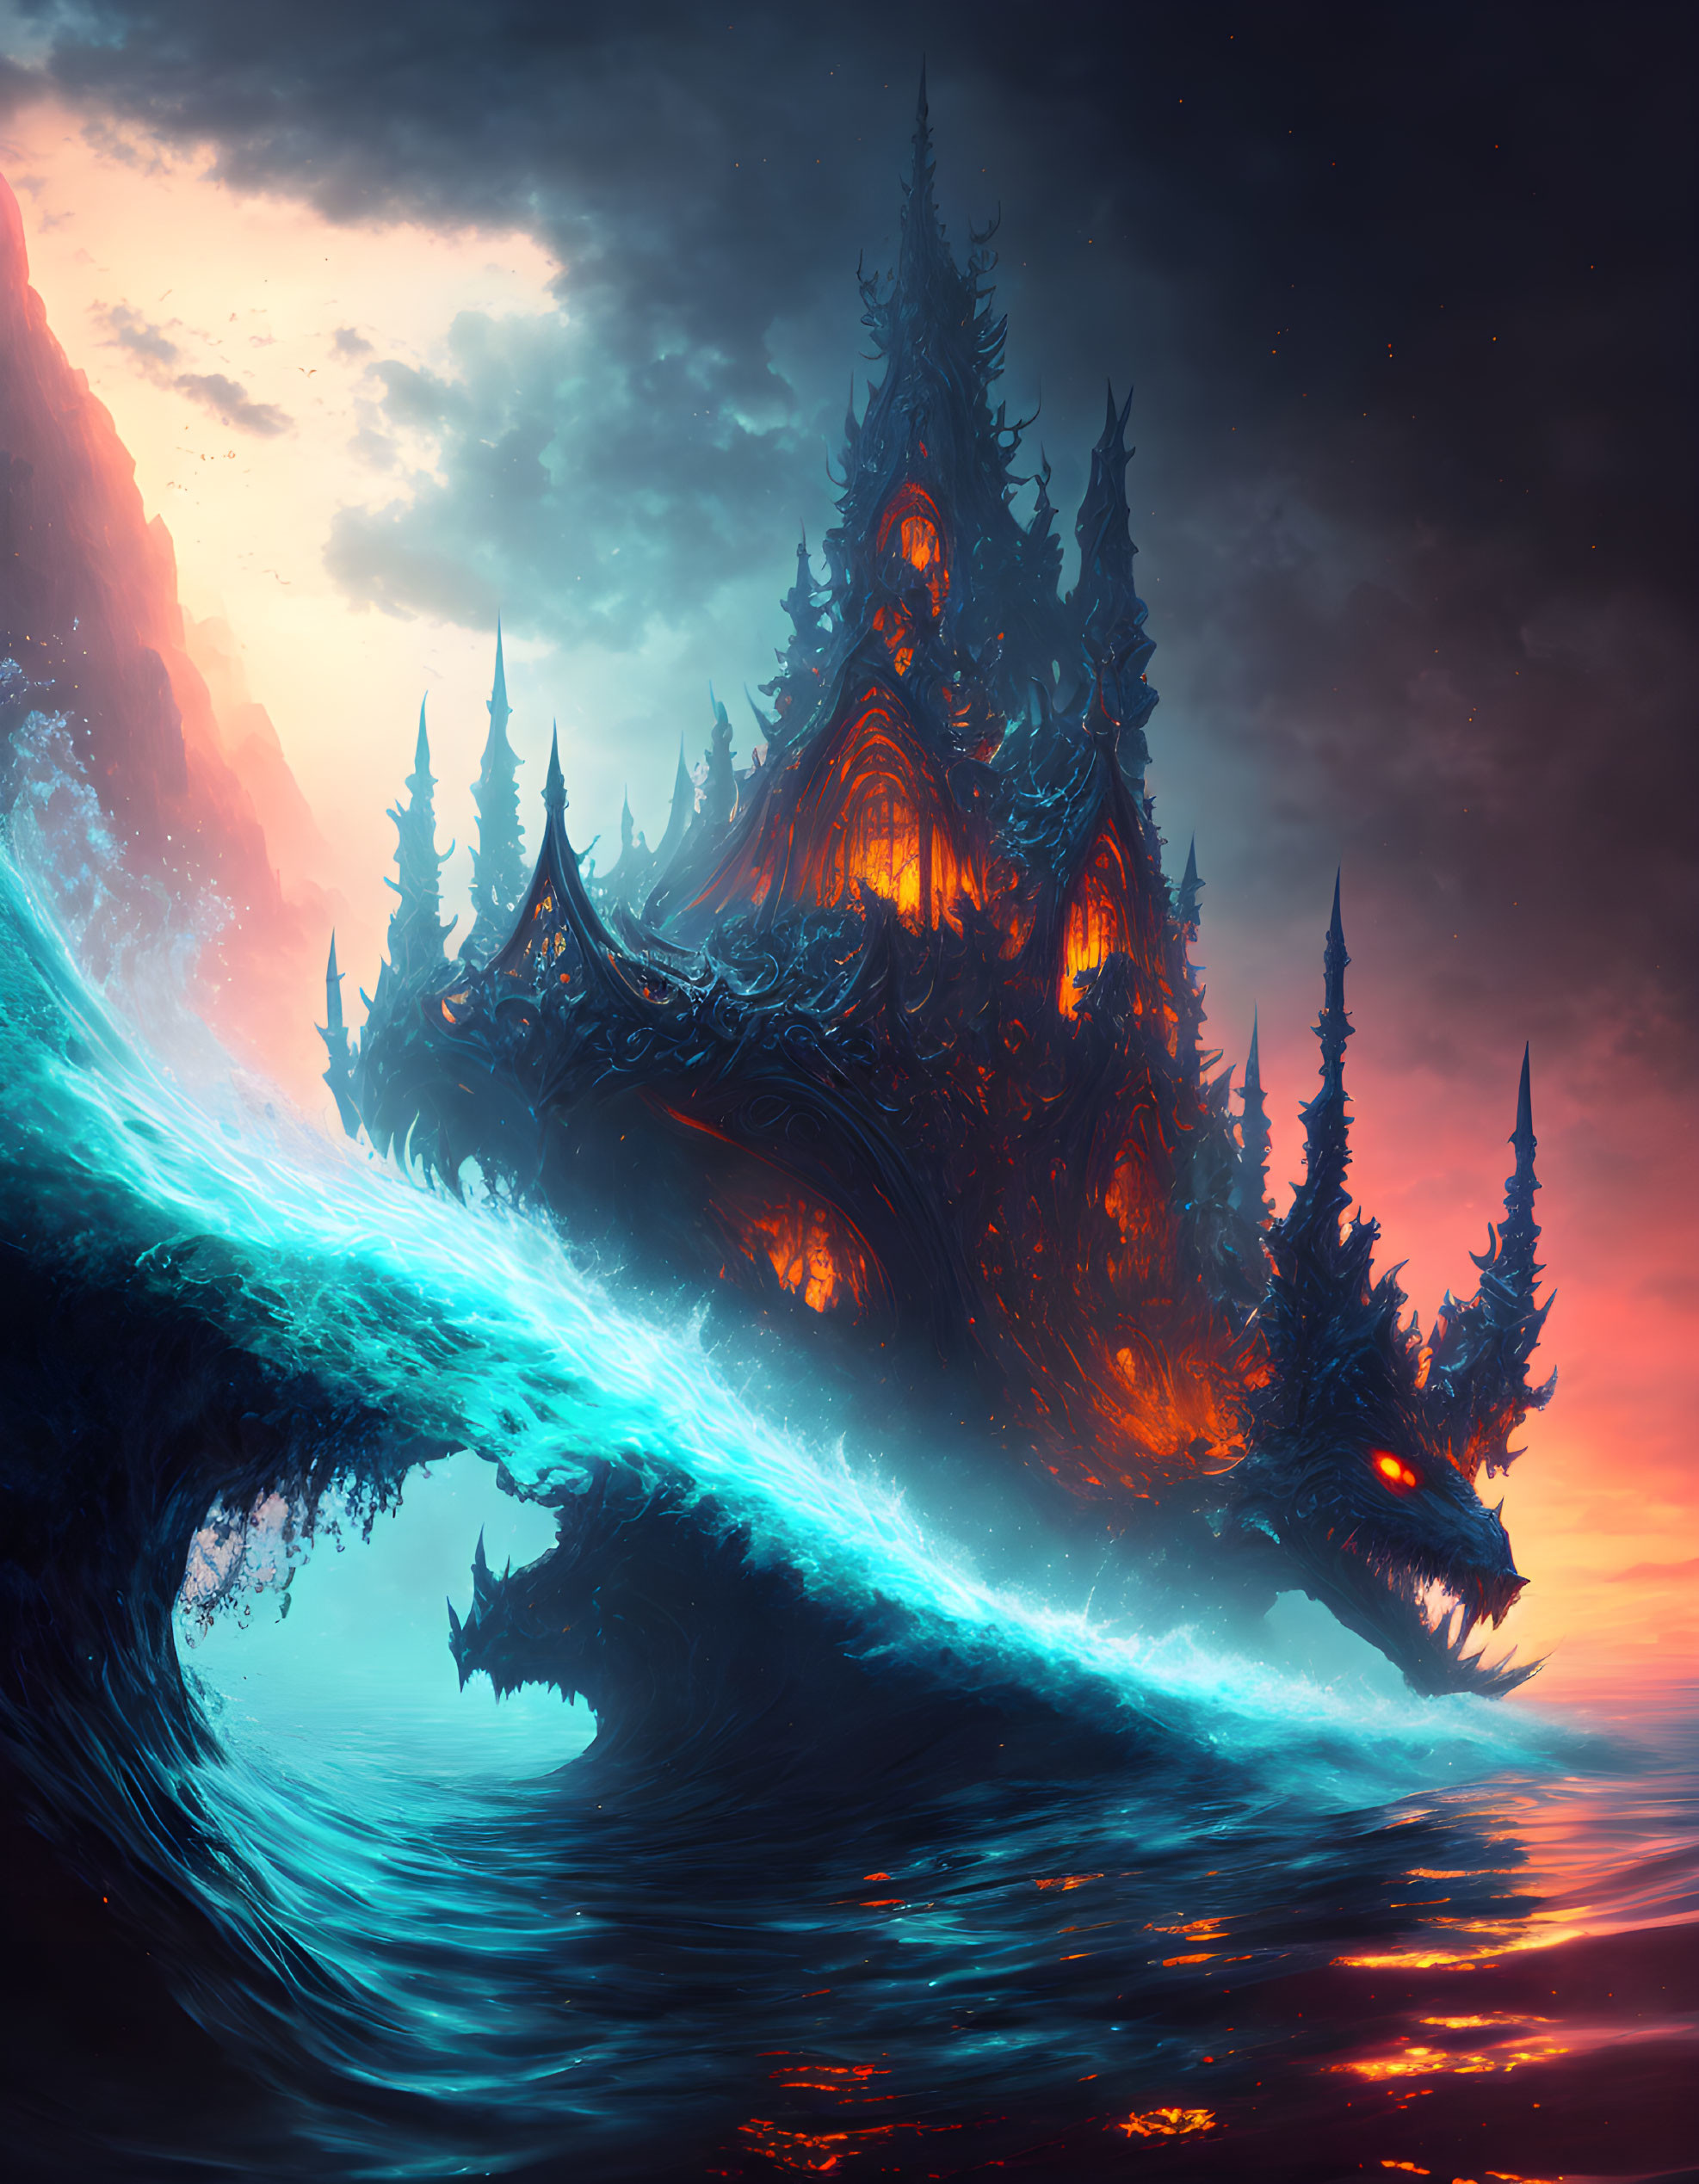 Eerie glowing castle by dramatic bioluminescent ocean at dusk